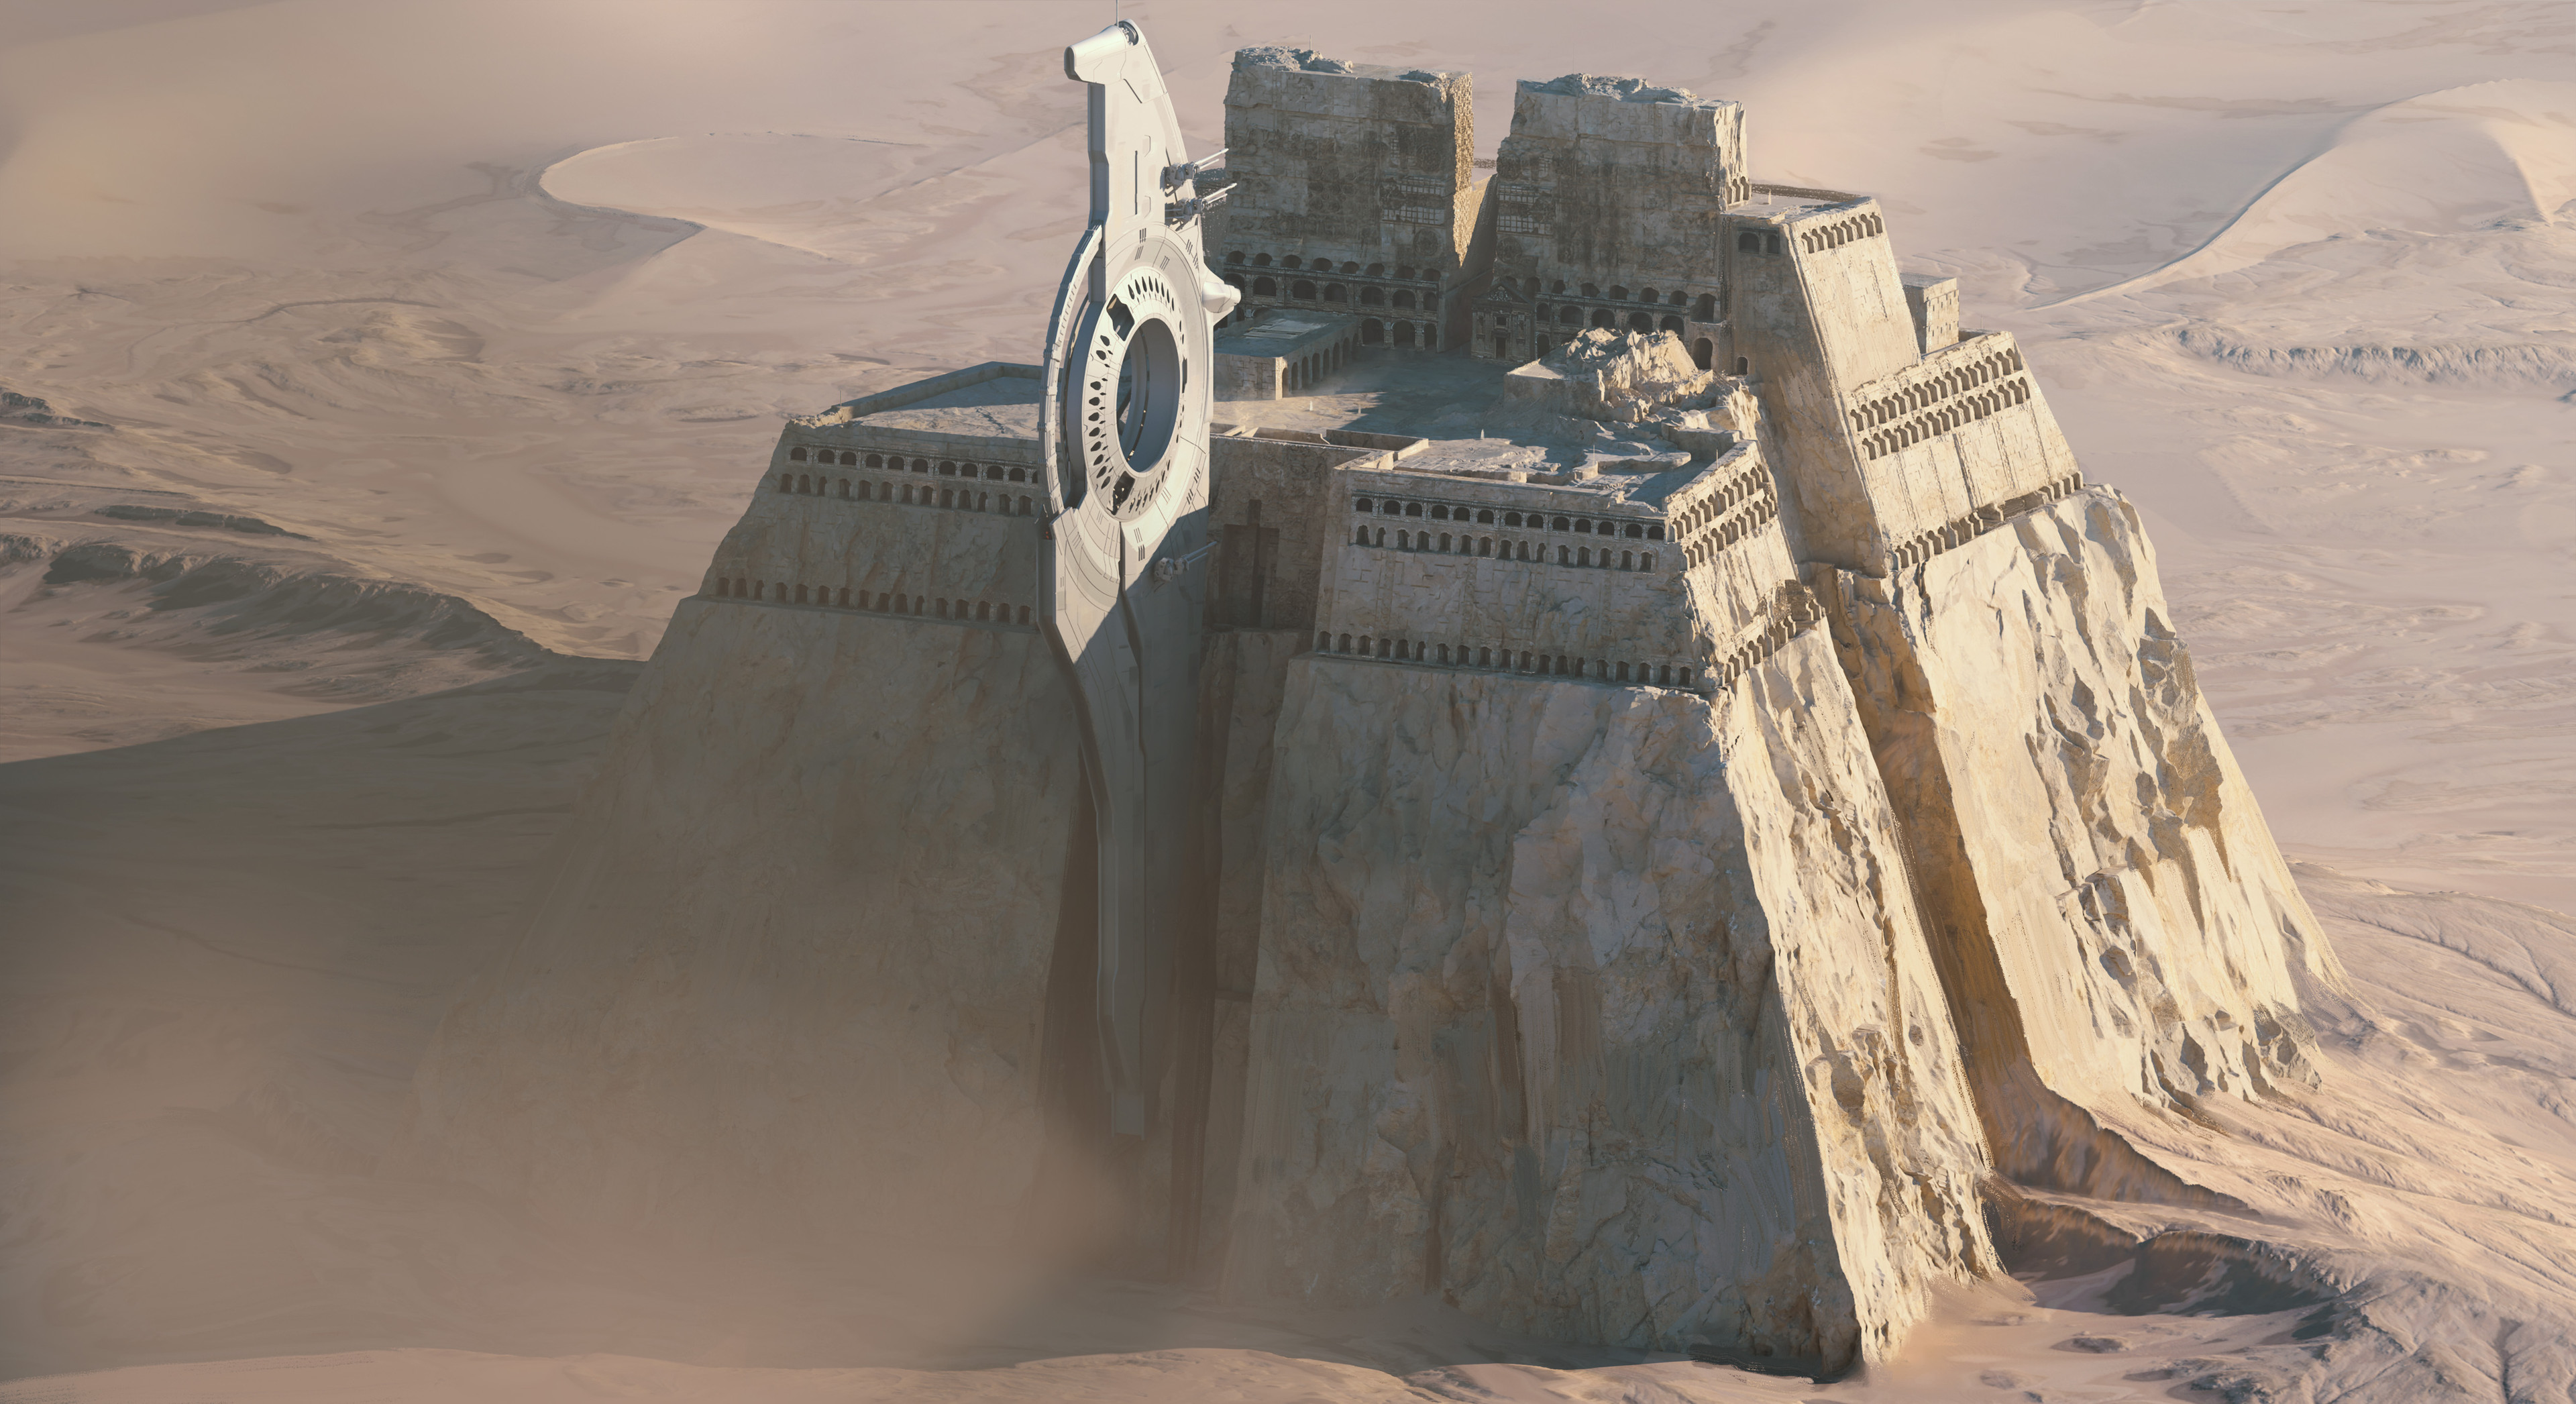 Ancient temple in the desert by Paul Chadeisson